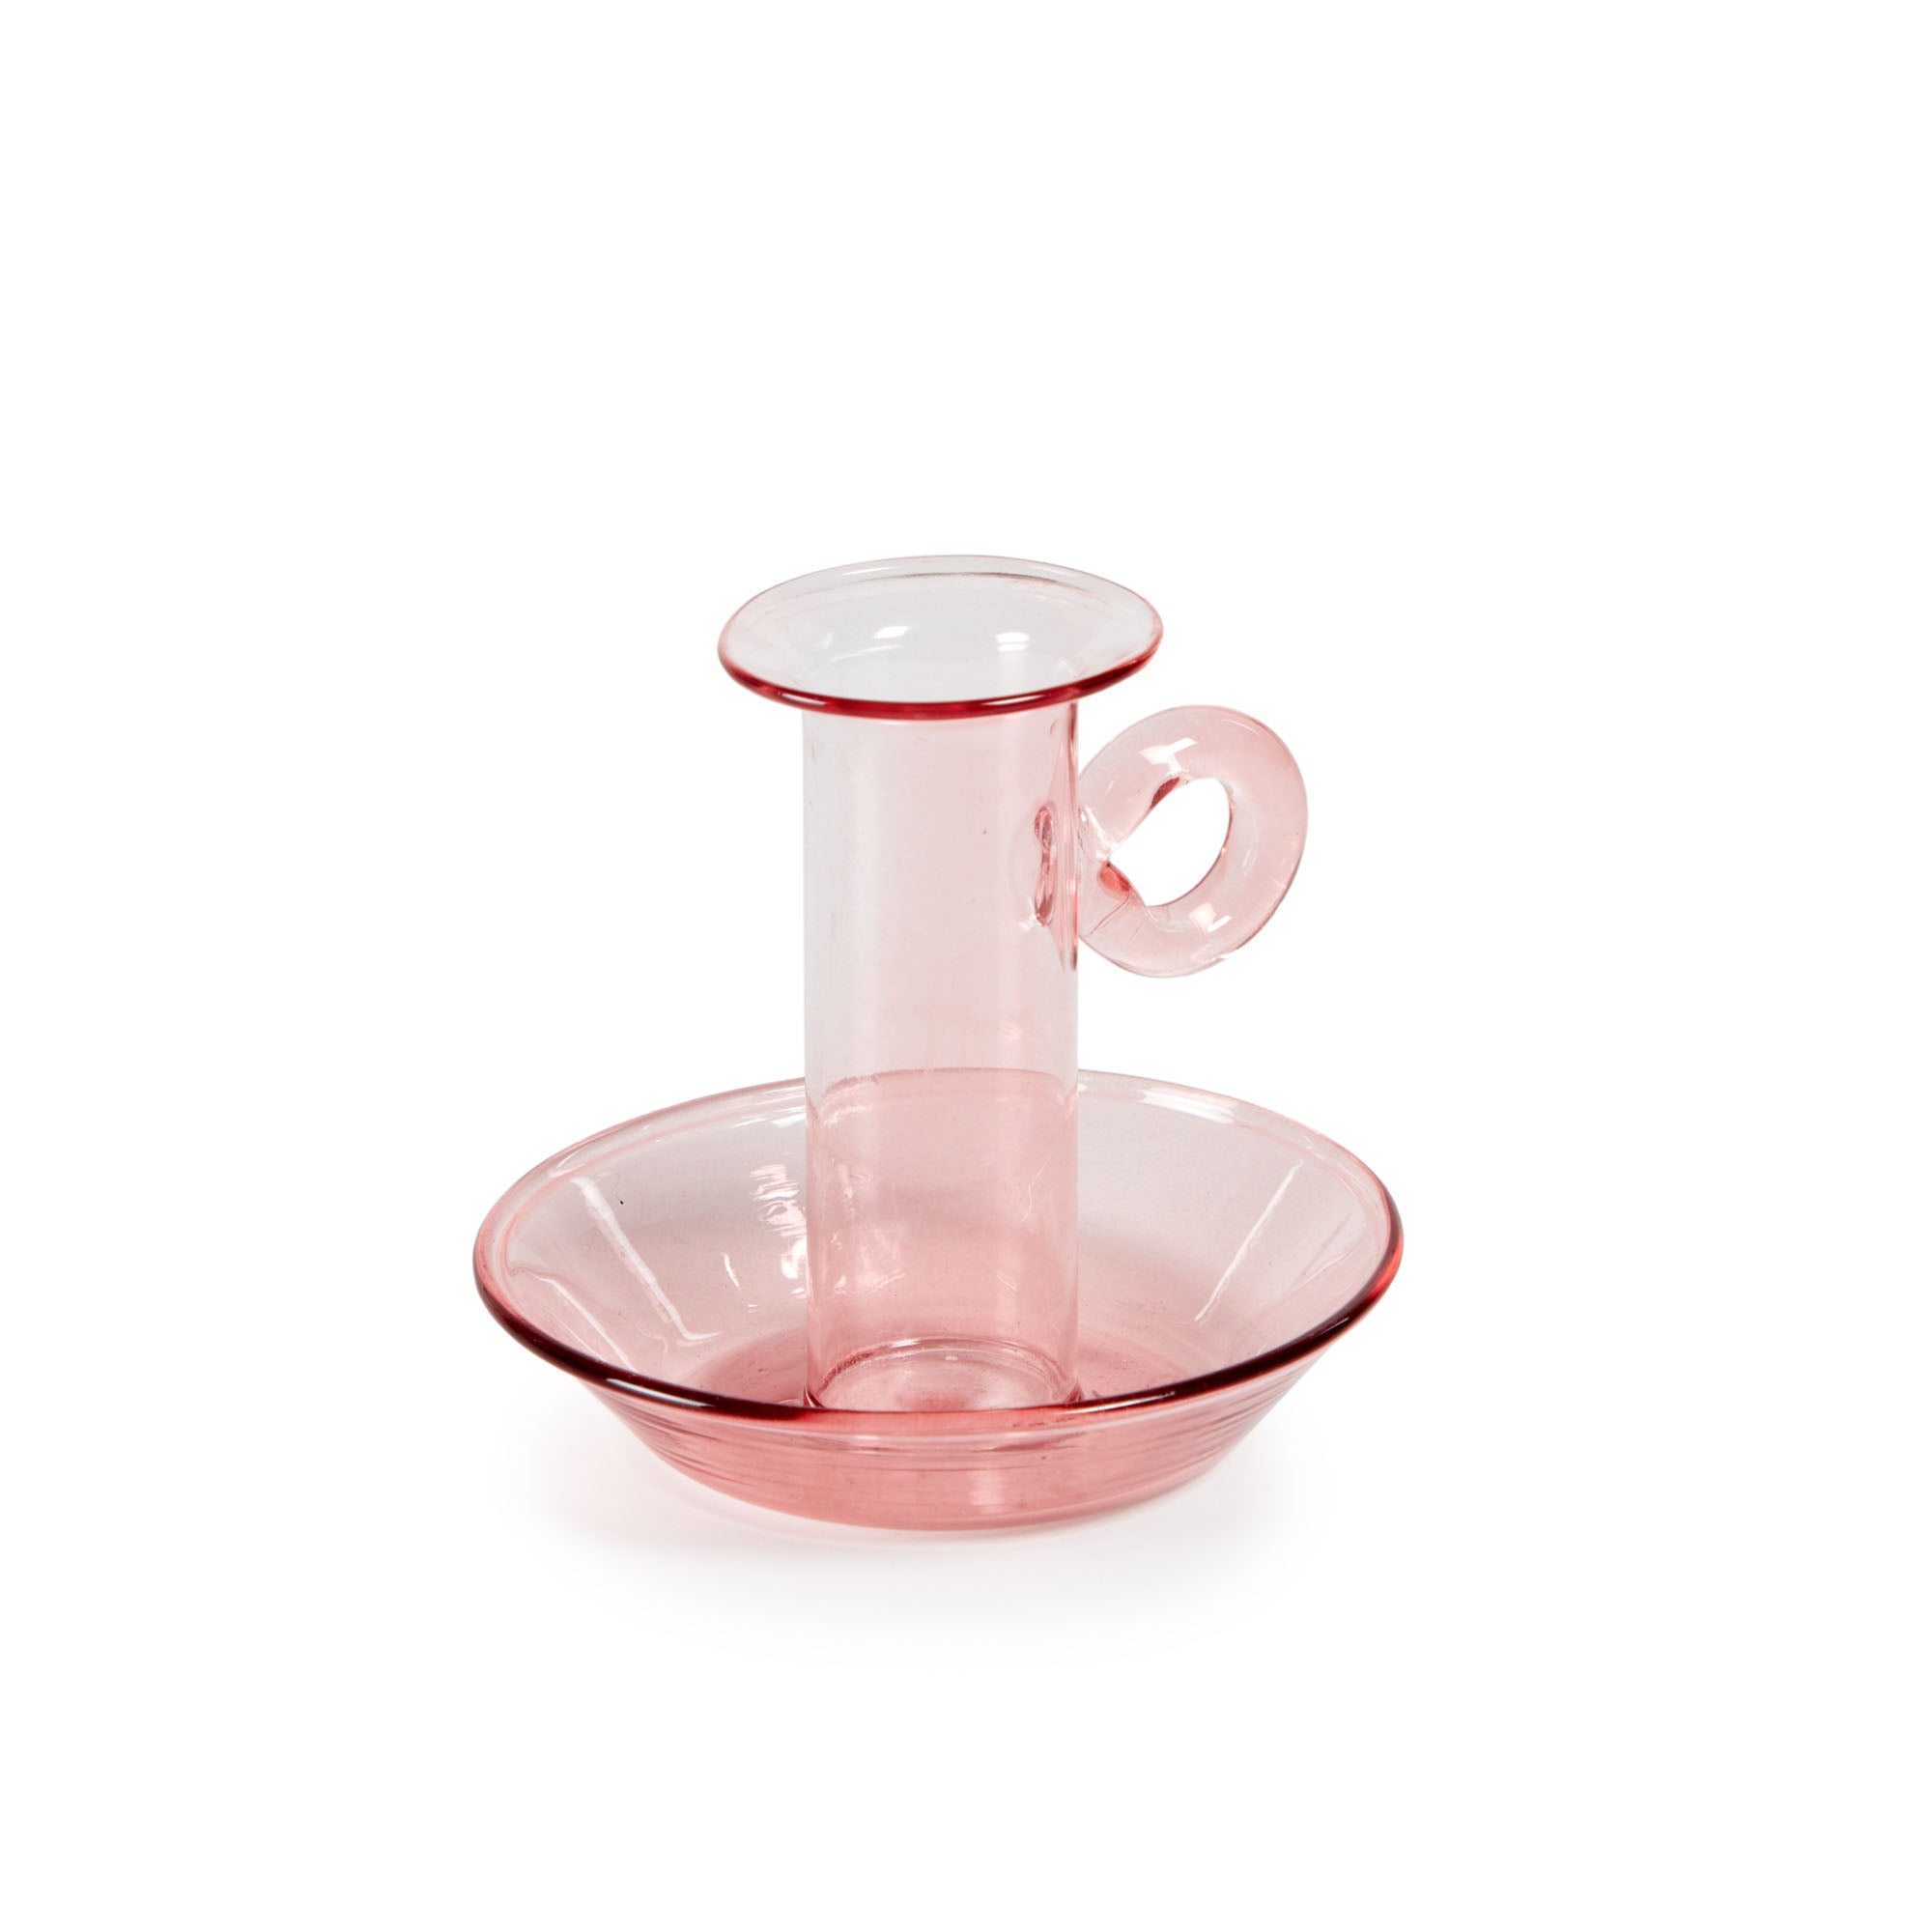 Yumalay small candle holder in pink glass